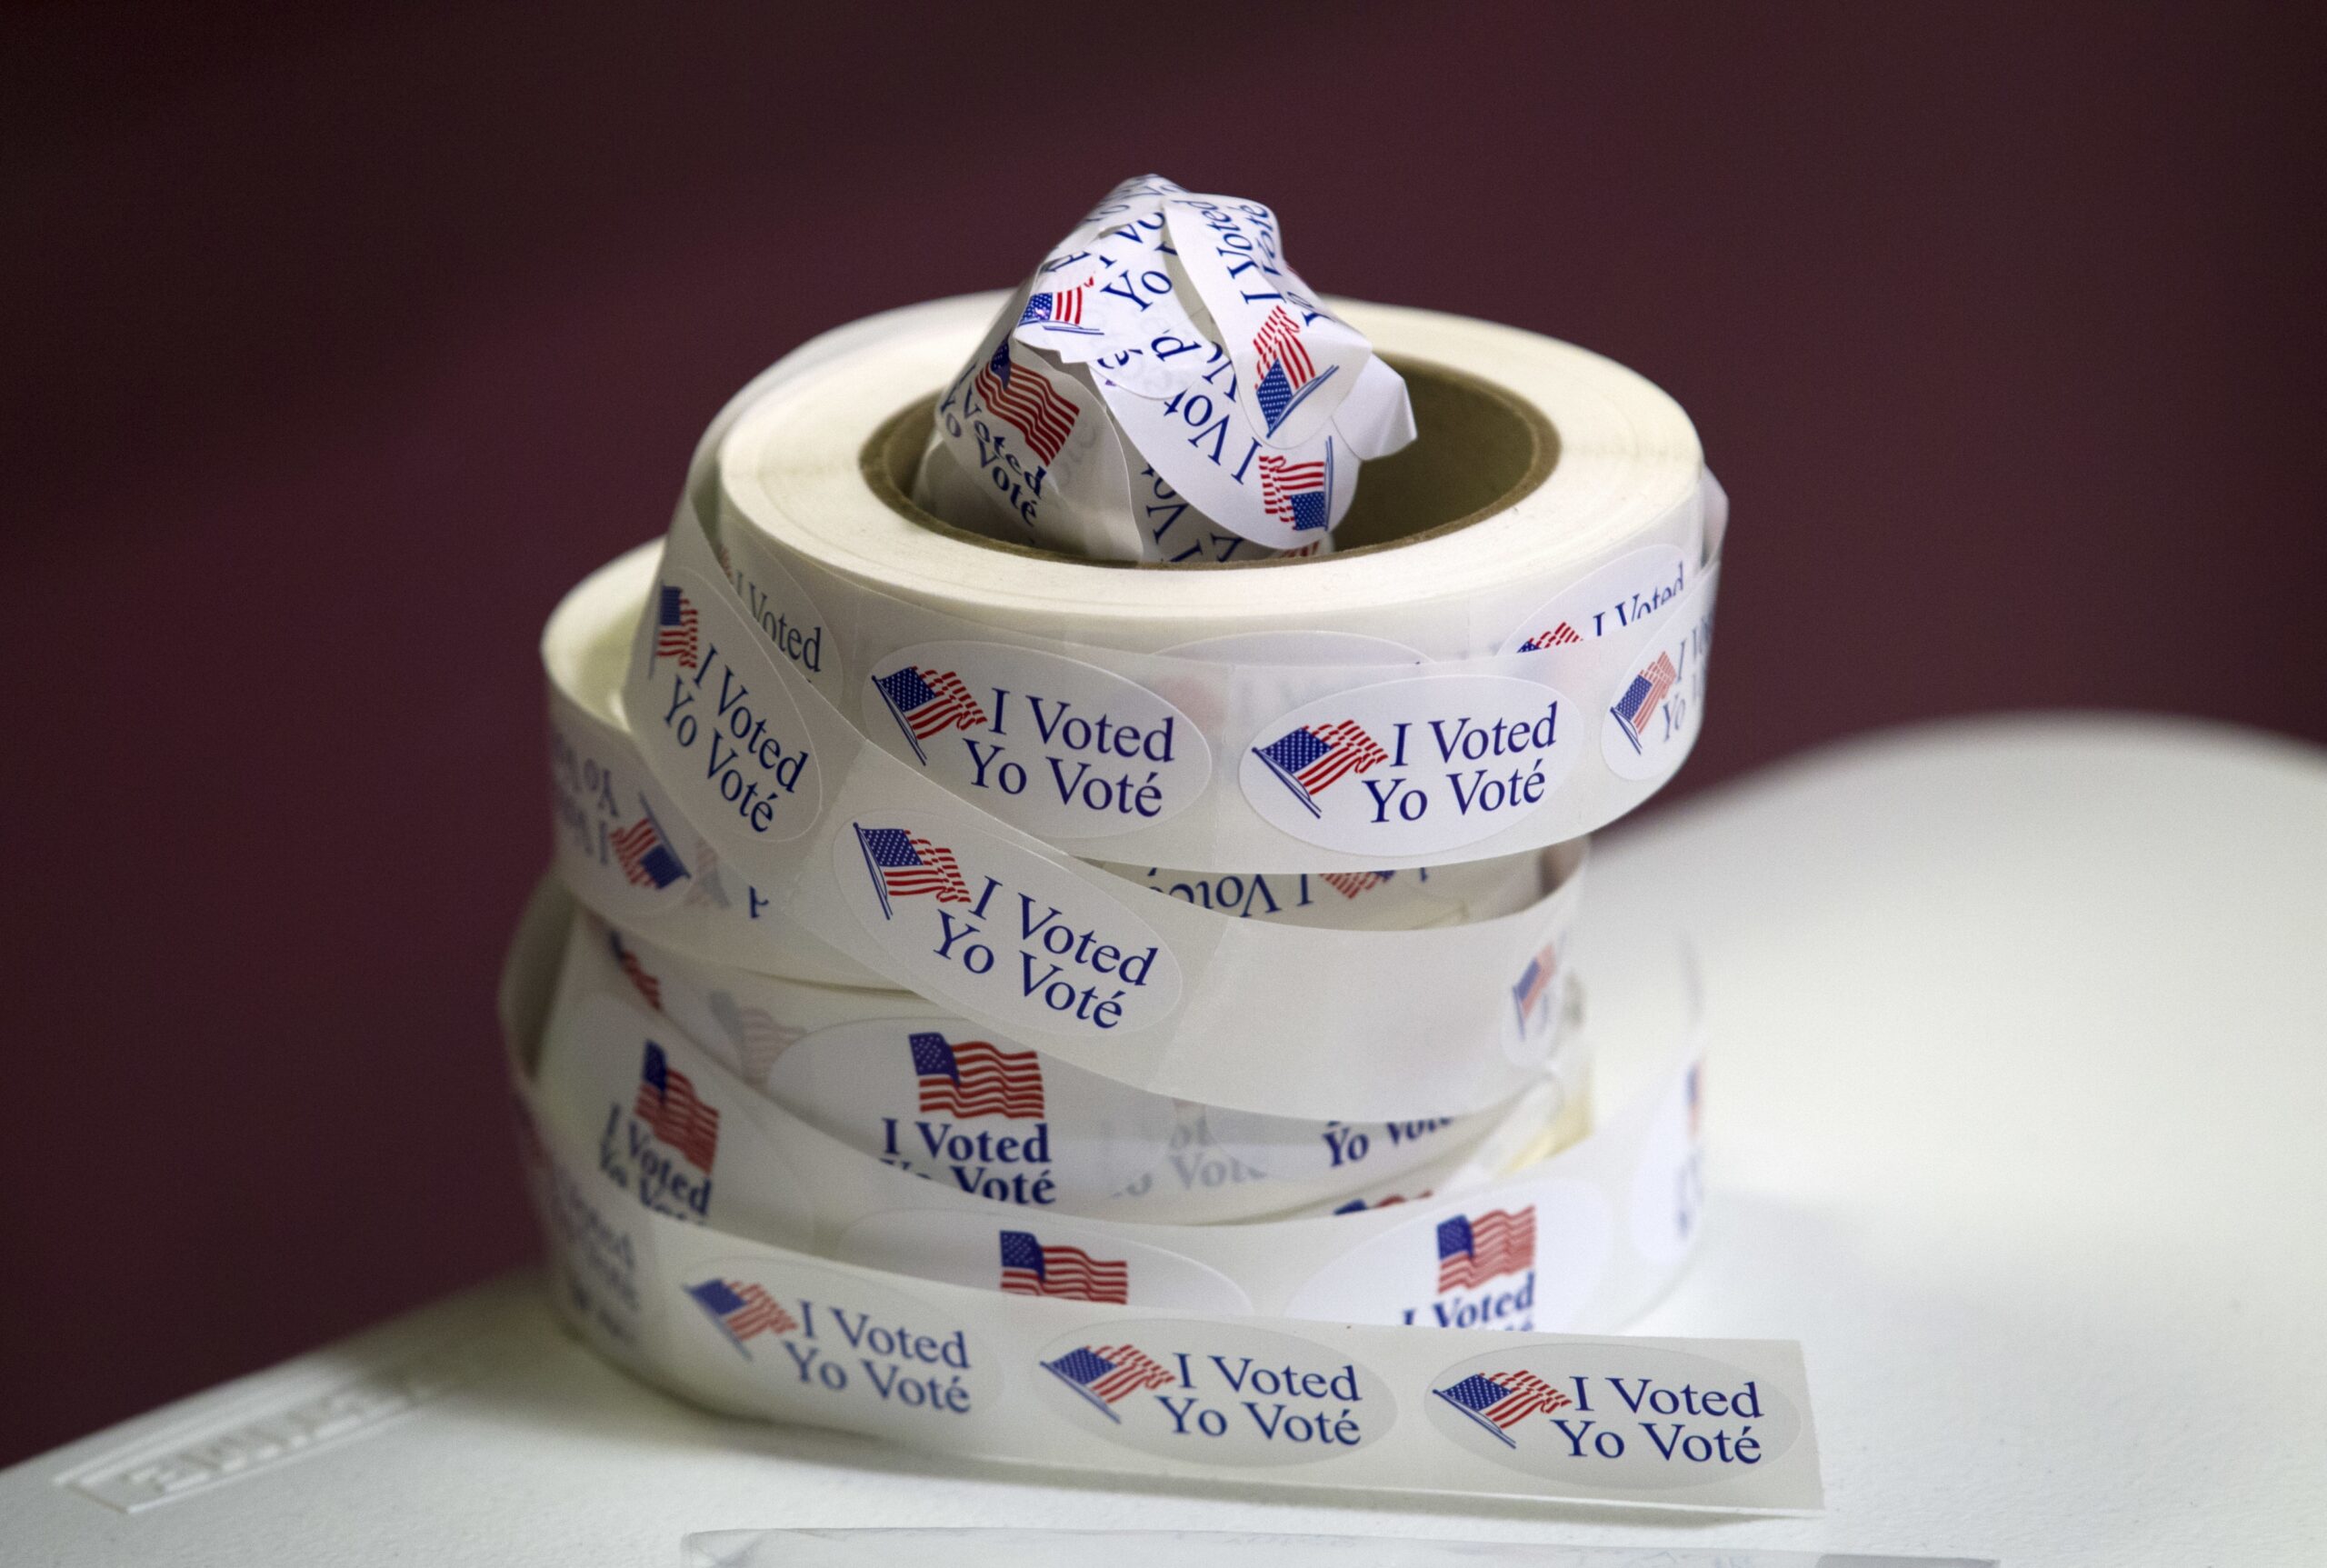 "I Voted" stickers are seen at polling place